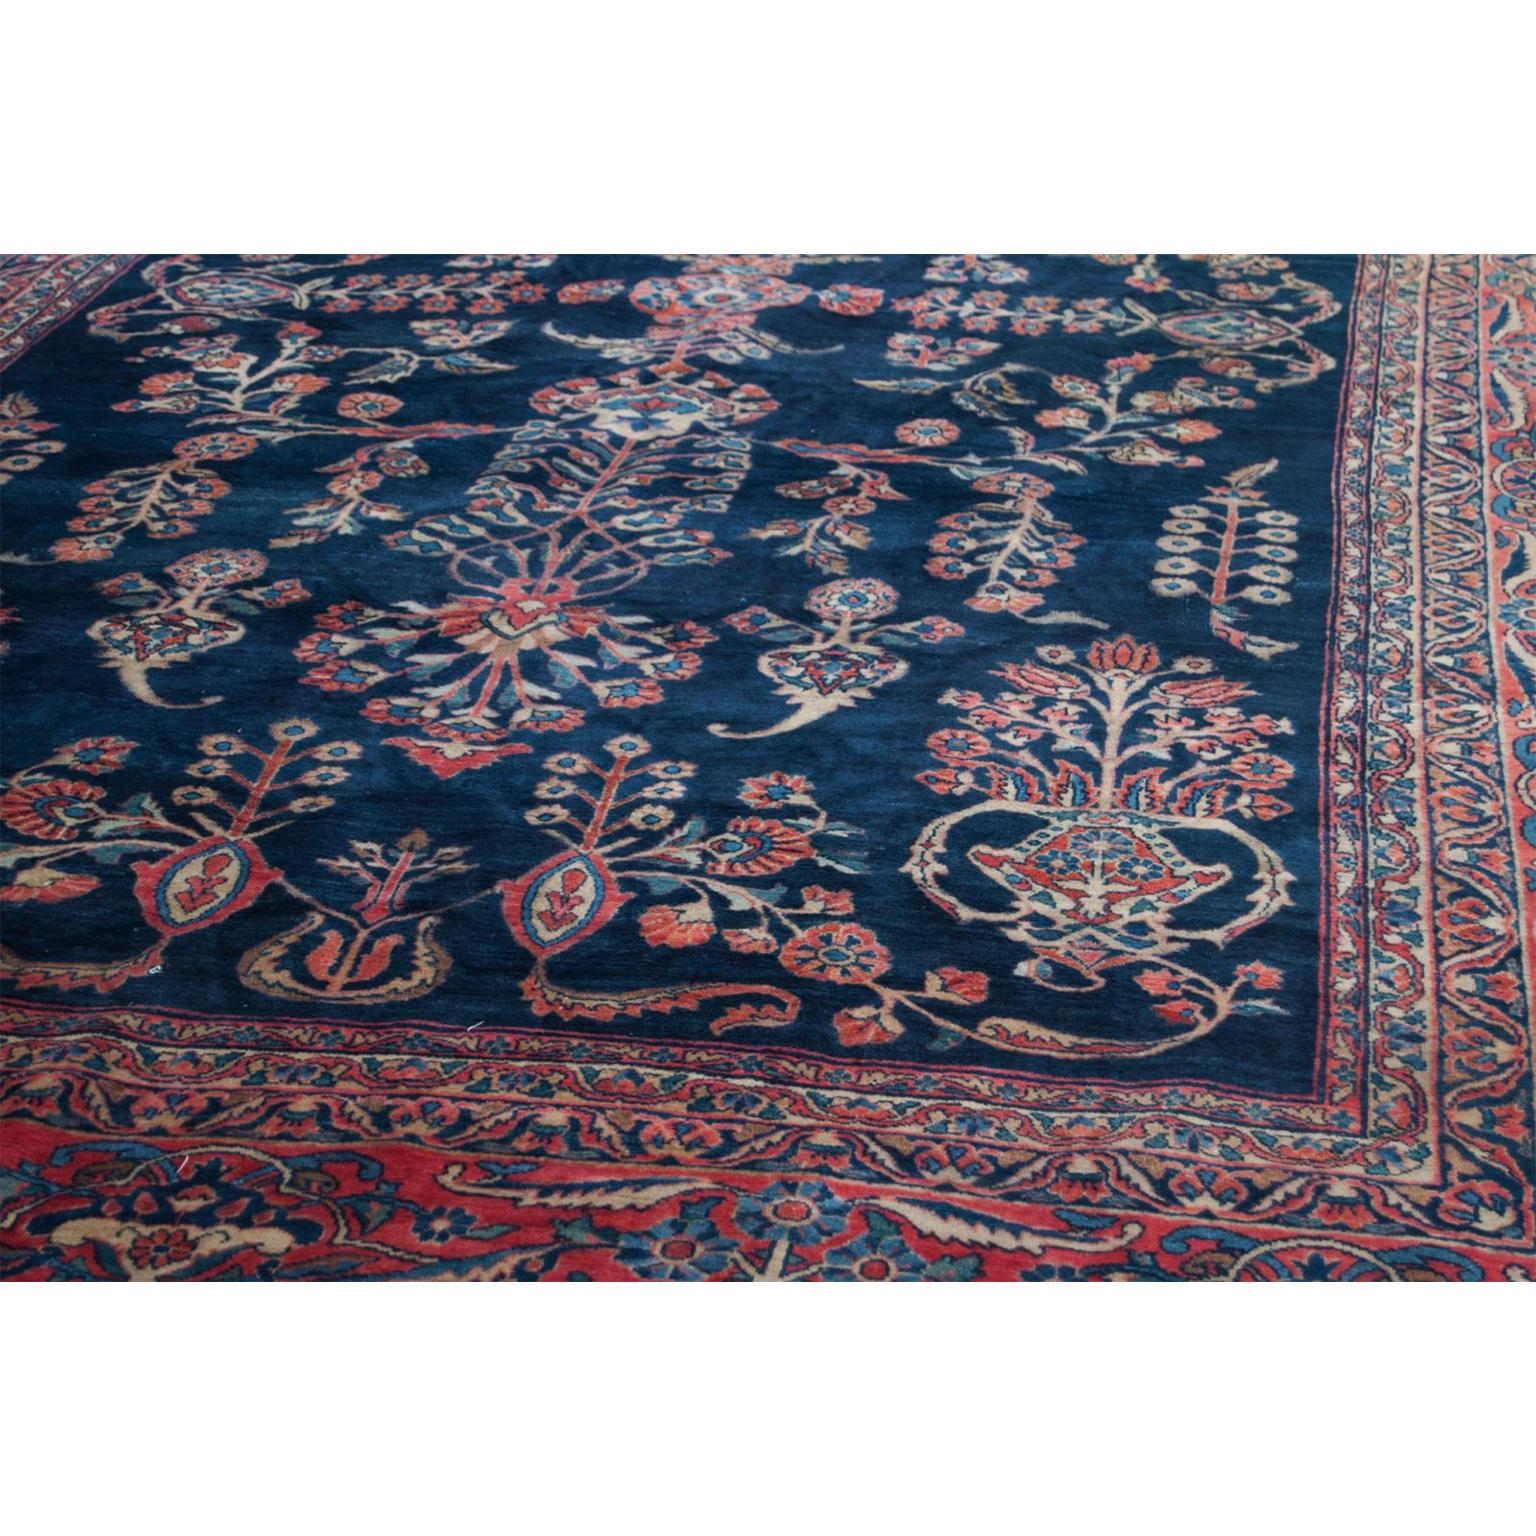 Known for their exceptional quality and ability to withstand decades of wear, Sarouks continue to be a best seller of the Persian rugs. This is a good decorative example of Sarough carpet weaving. The formal design is typically seen, and the most